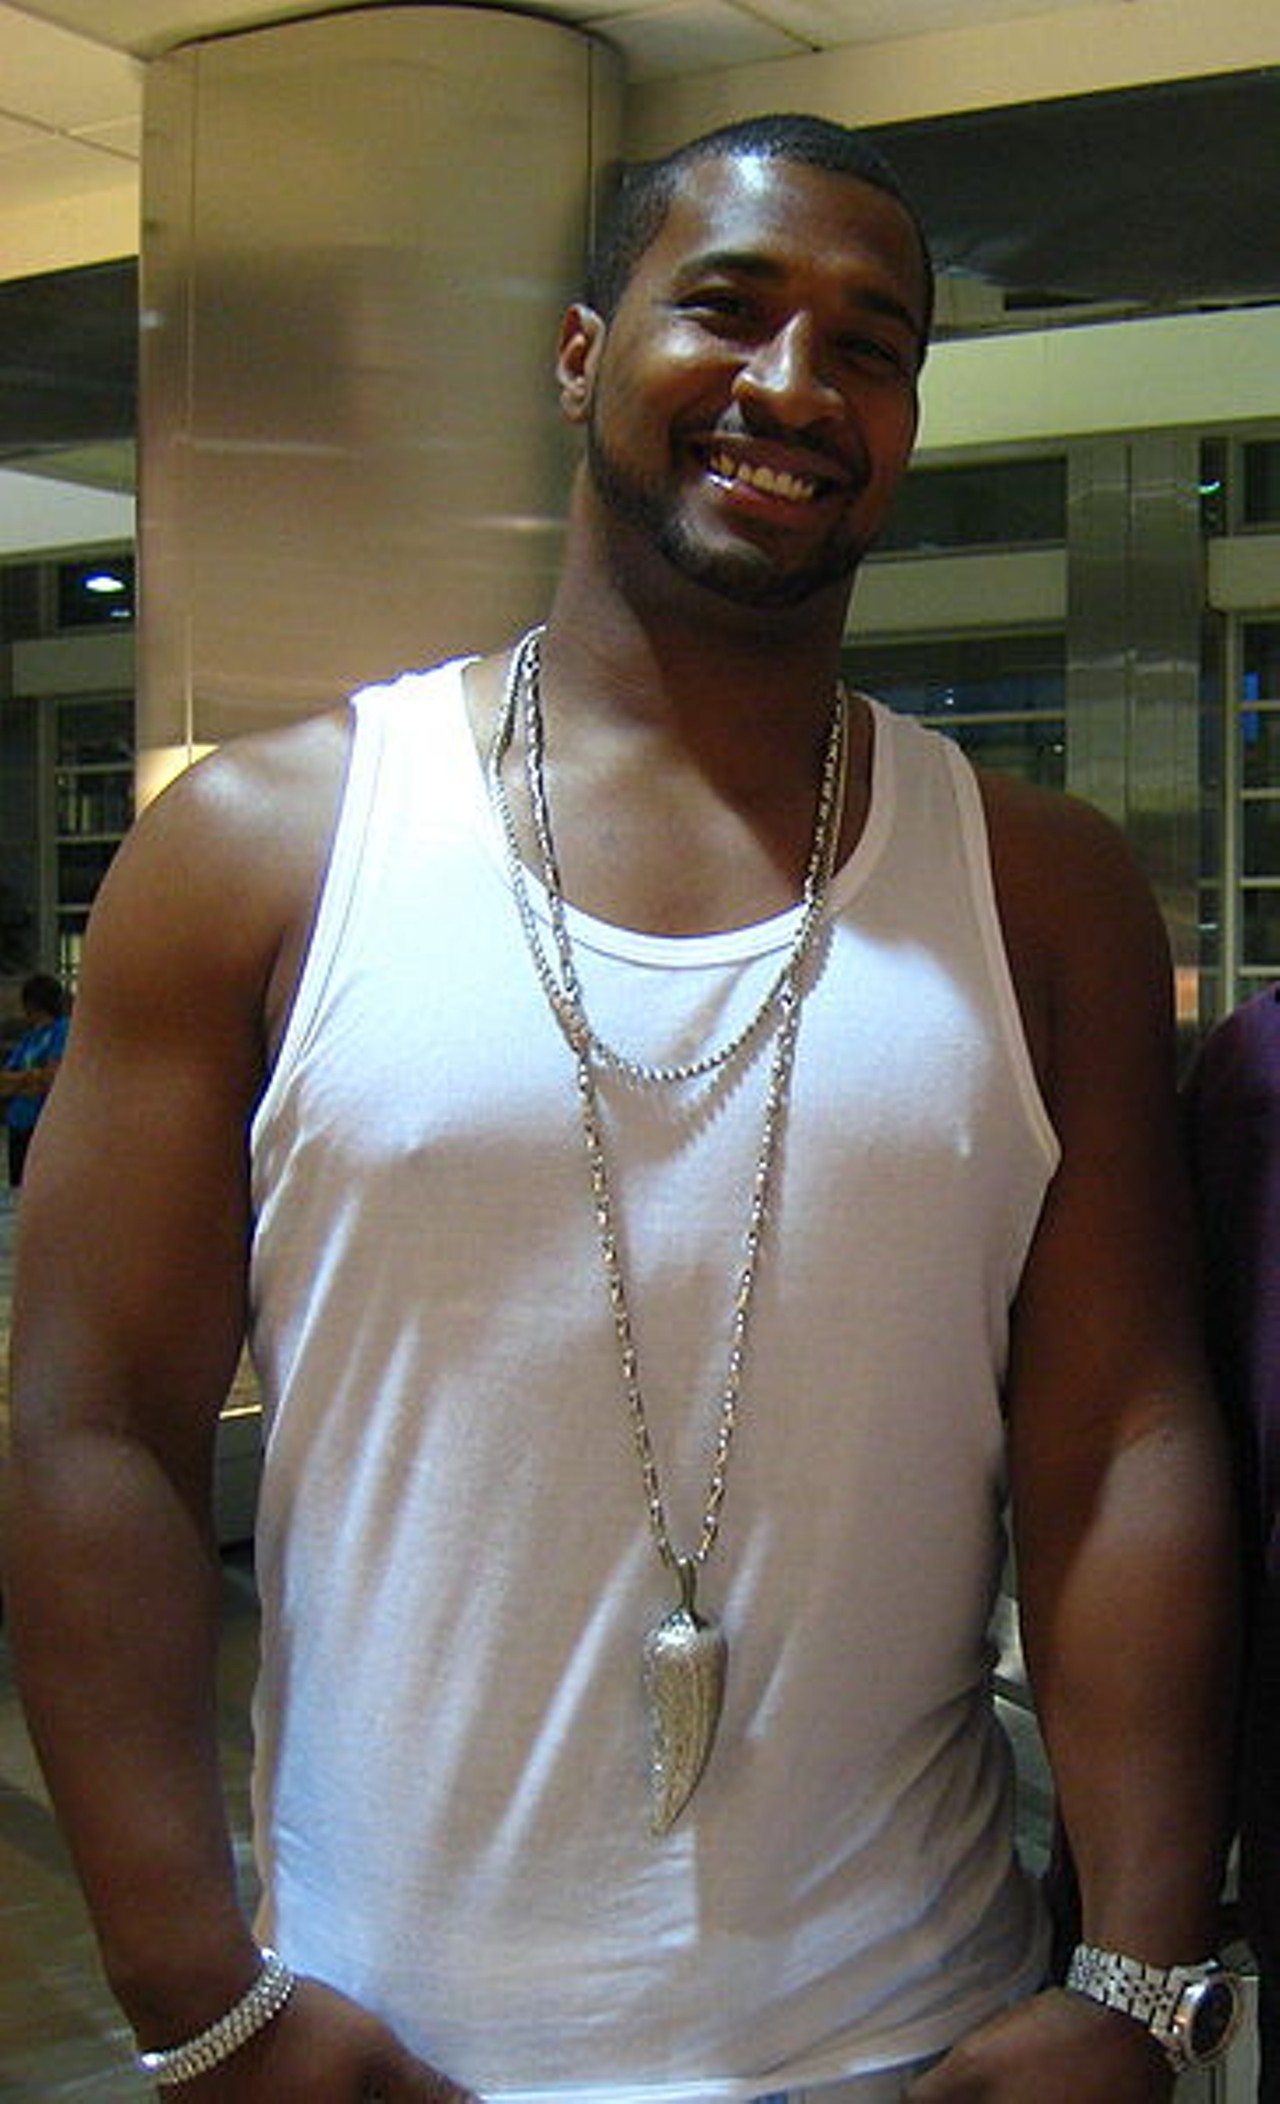 Daunte Culpepper- Former NFL quarterback who played for the Lions, Raiders, Dolphins and Vikings.